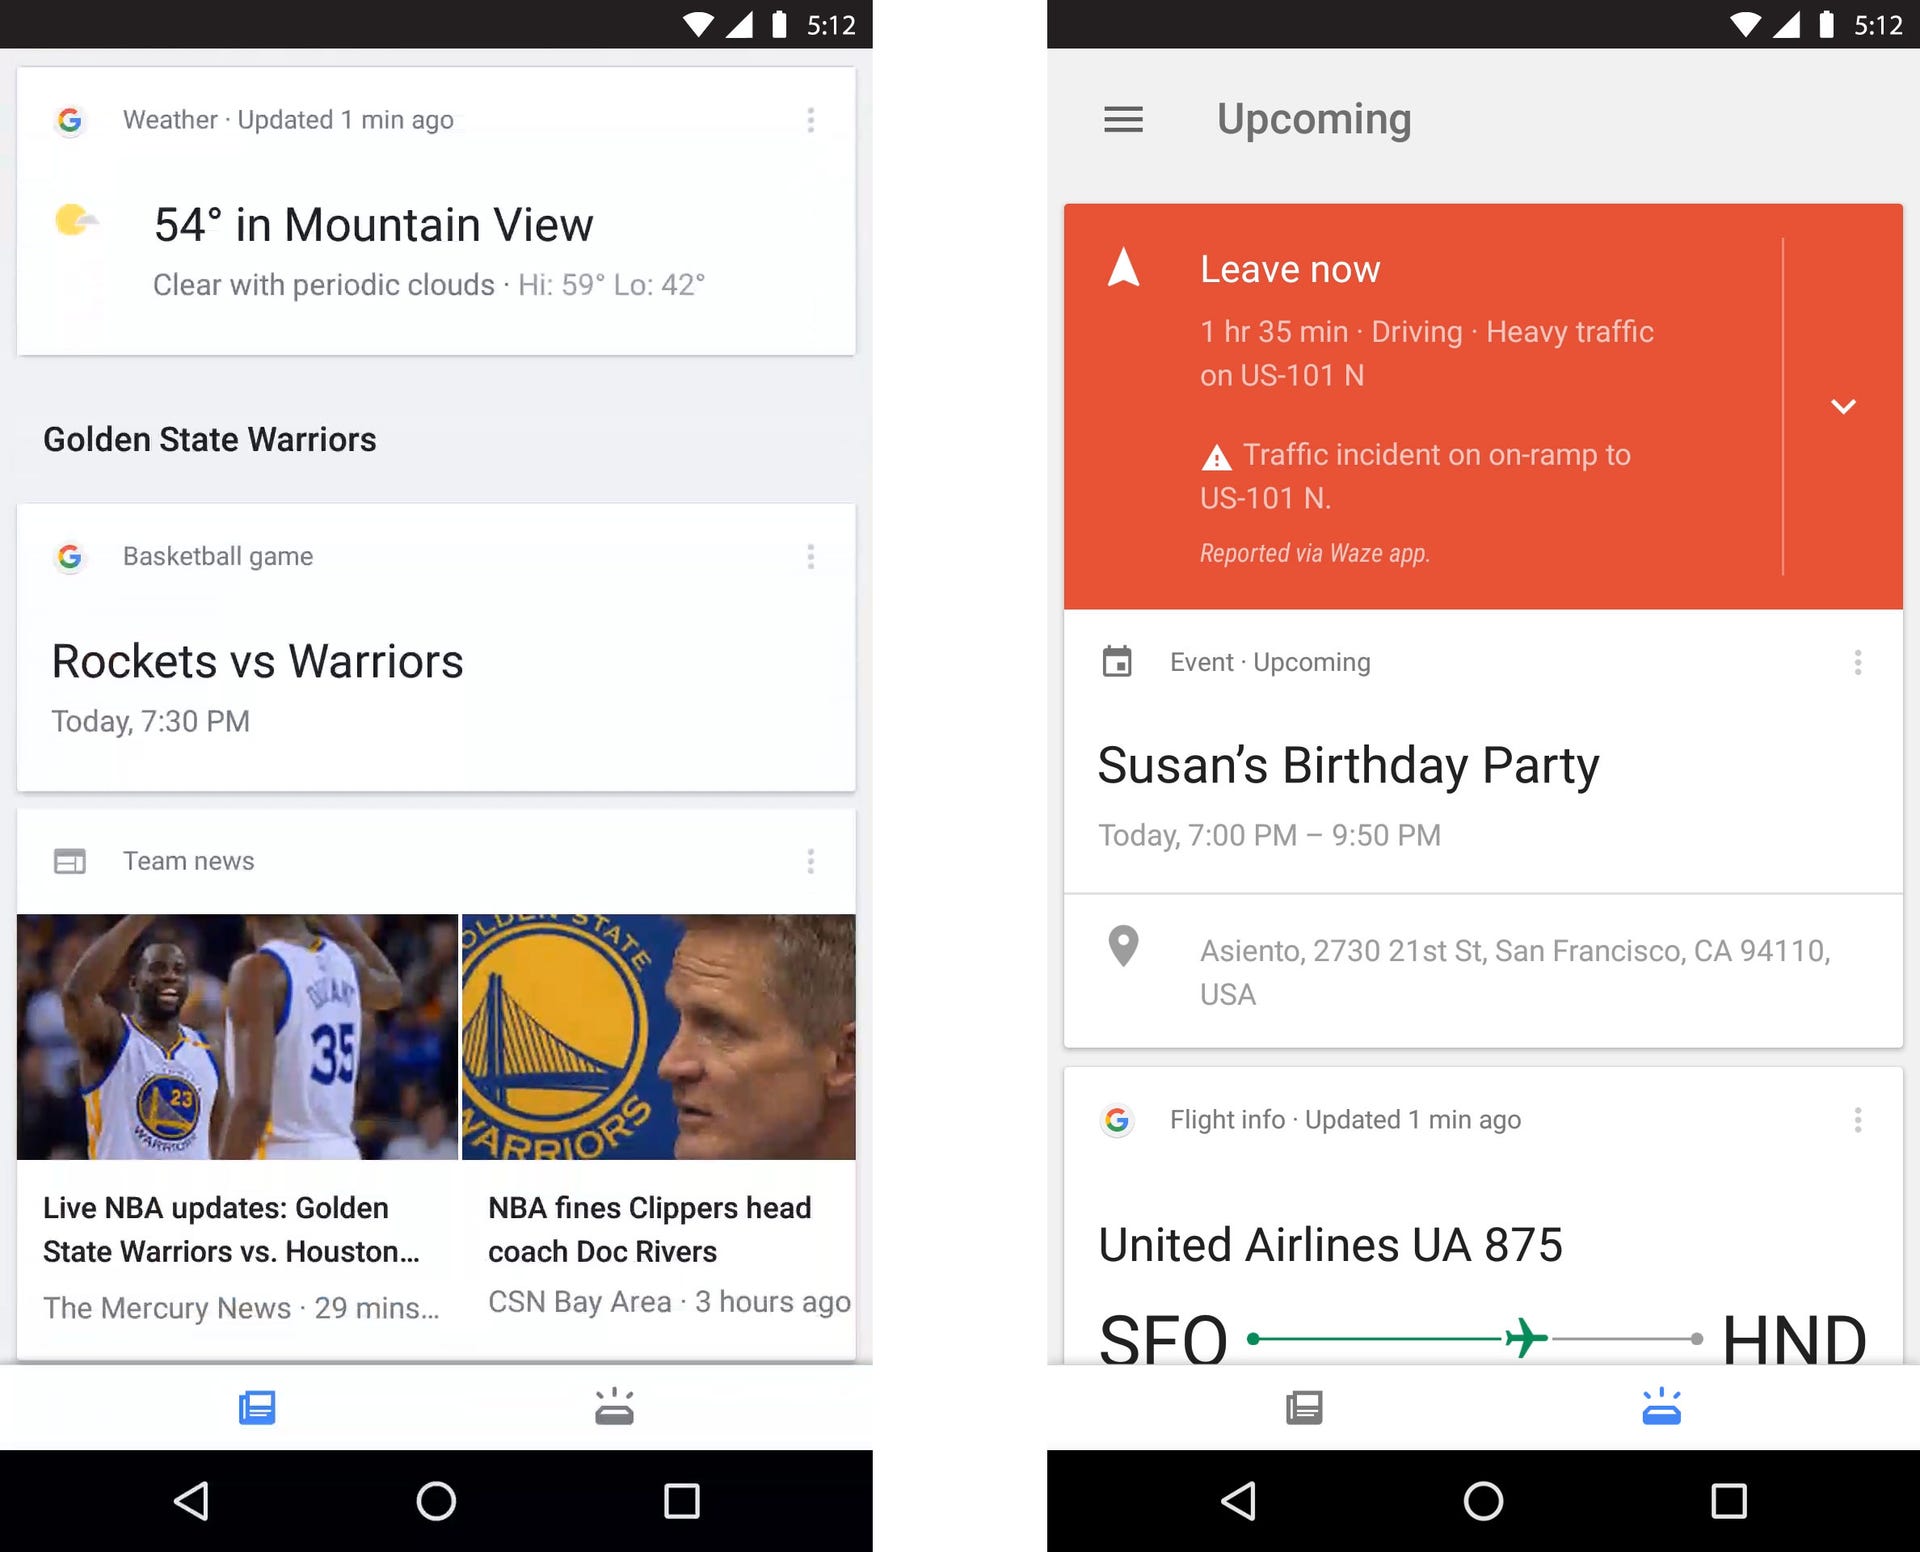 ​The Google app for Android splits cards into two sections, a feed (at left) and personal upcoming information.